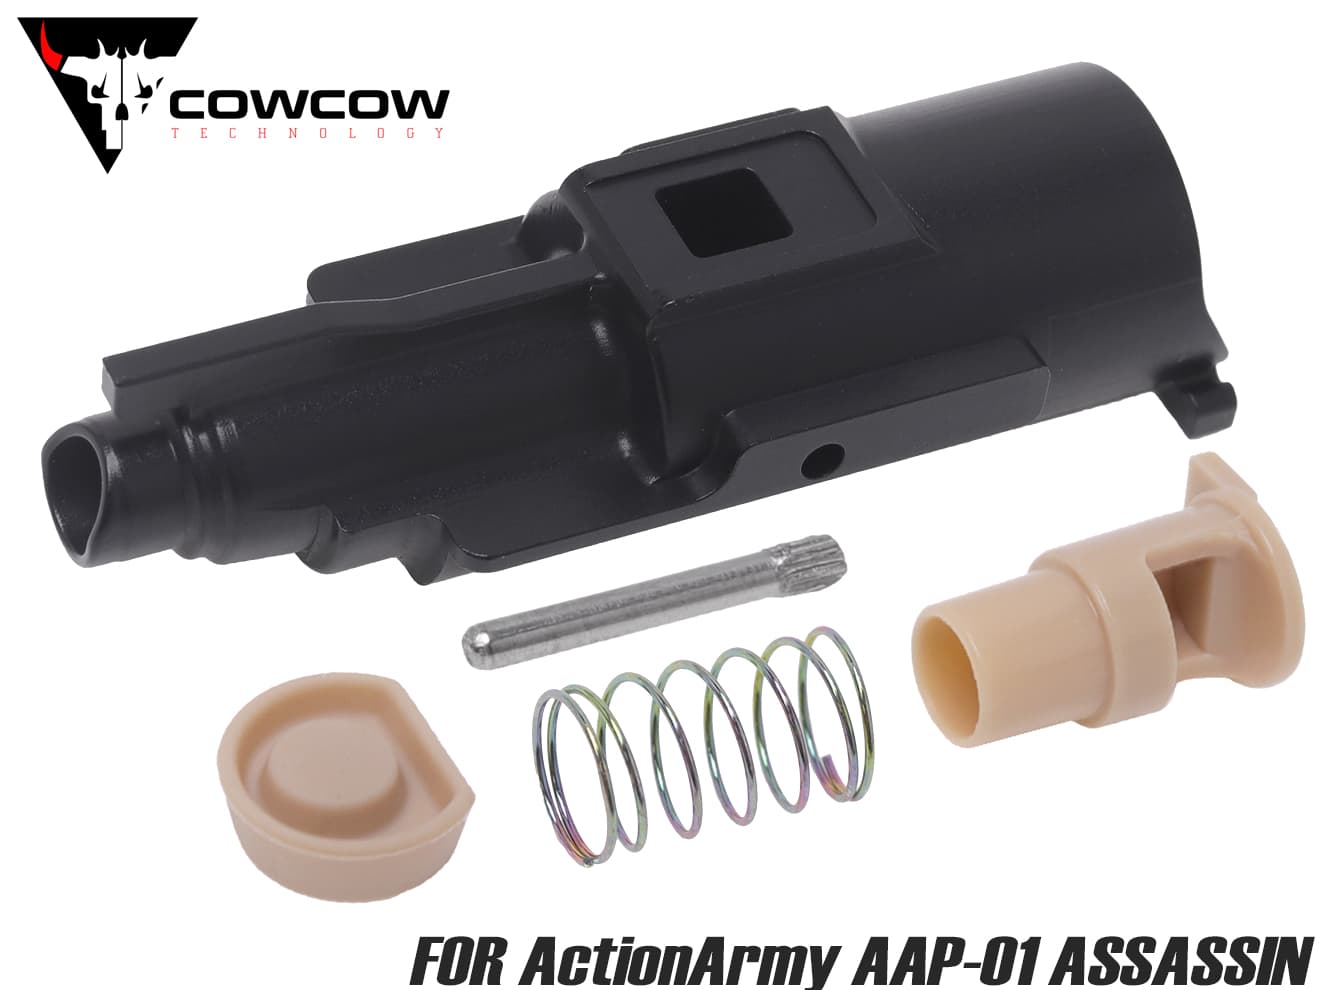 COWCOW TECHNOLOGY 強化ローディングノズルフルセット for ActionArmy 